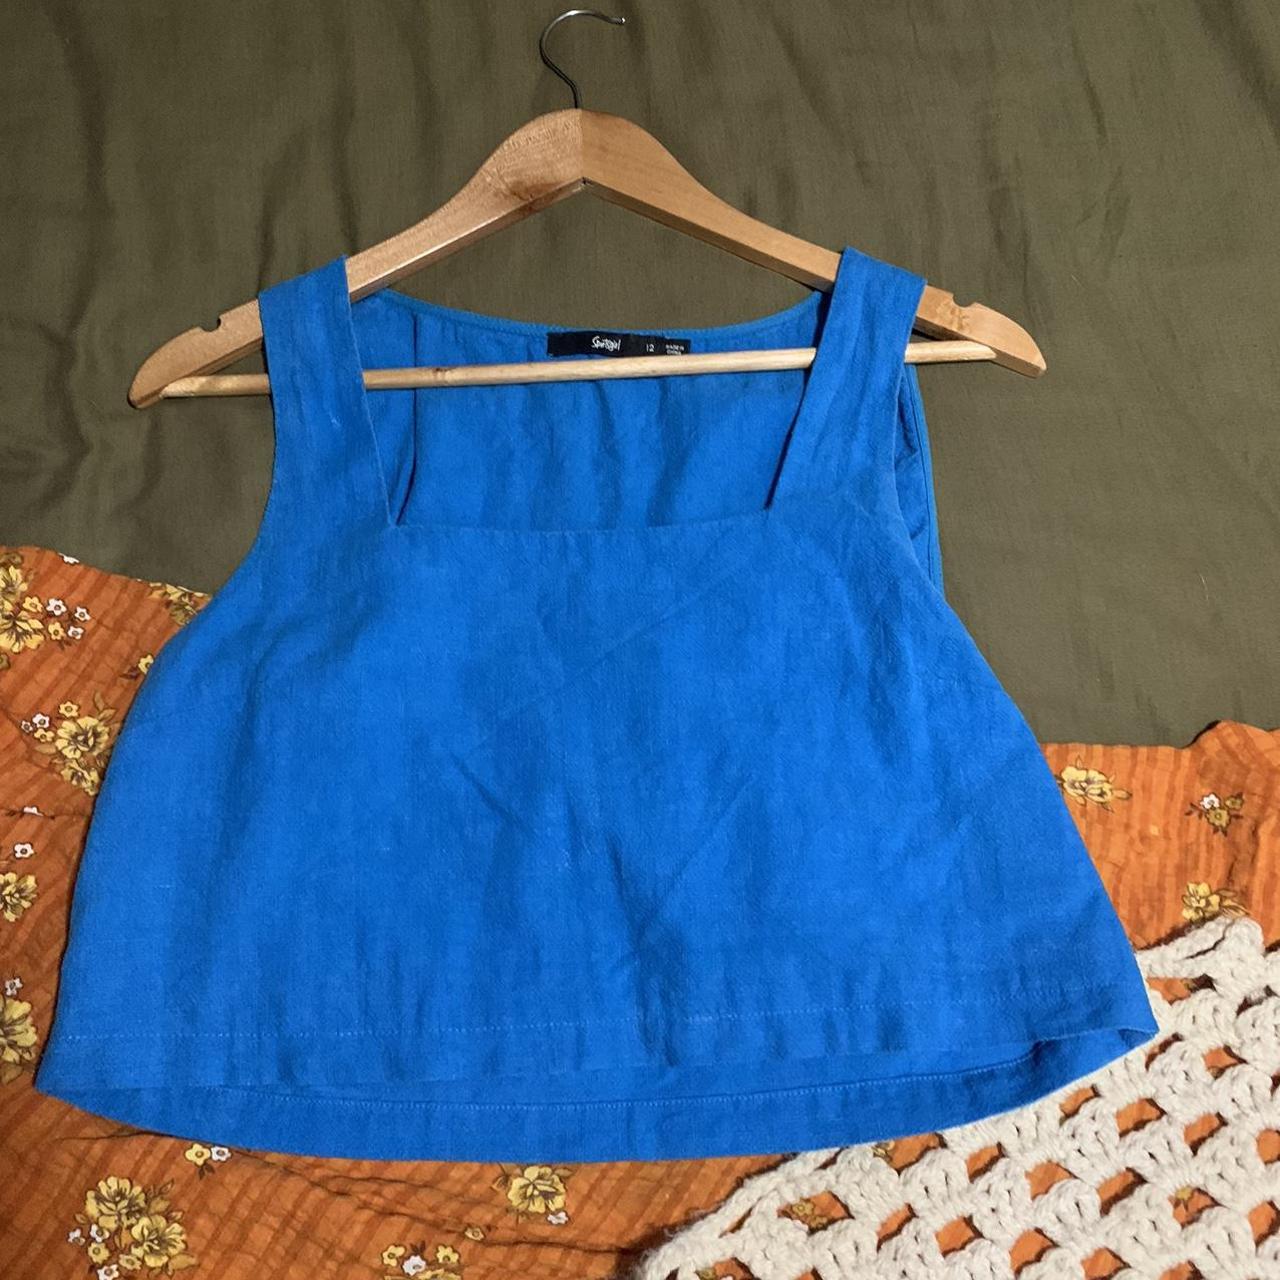 Blue sportsgirl cropped top! Size 12 but fits... - Depop